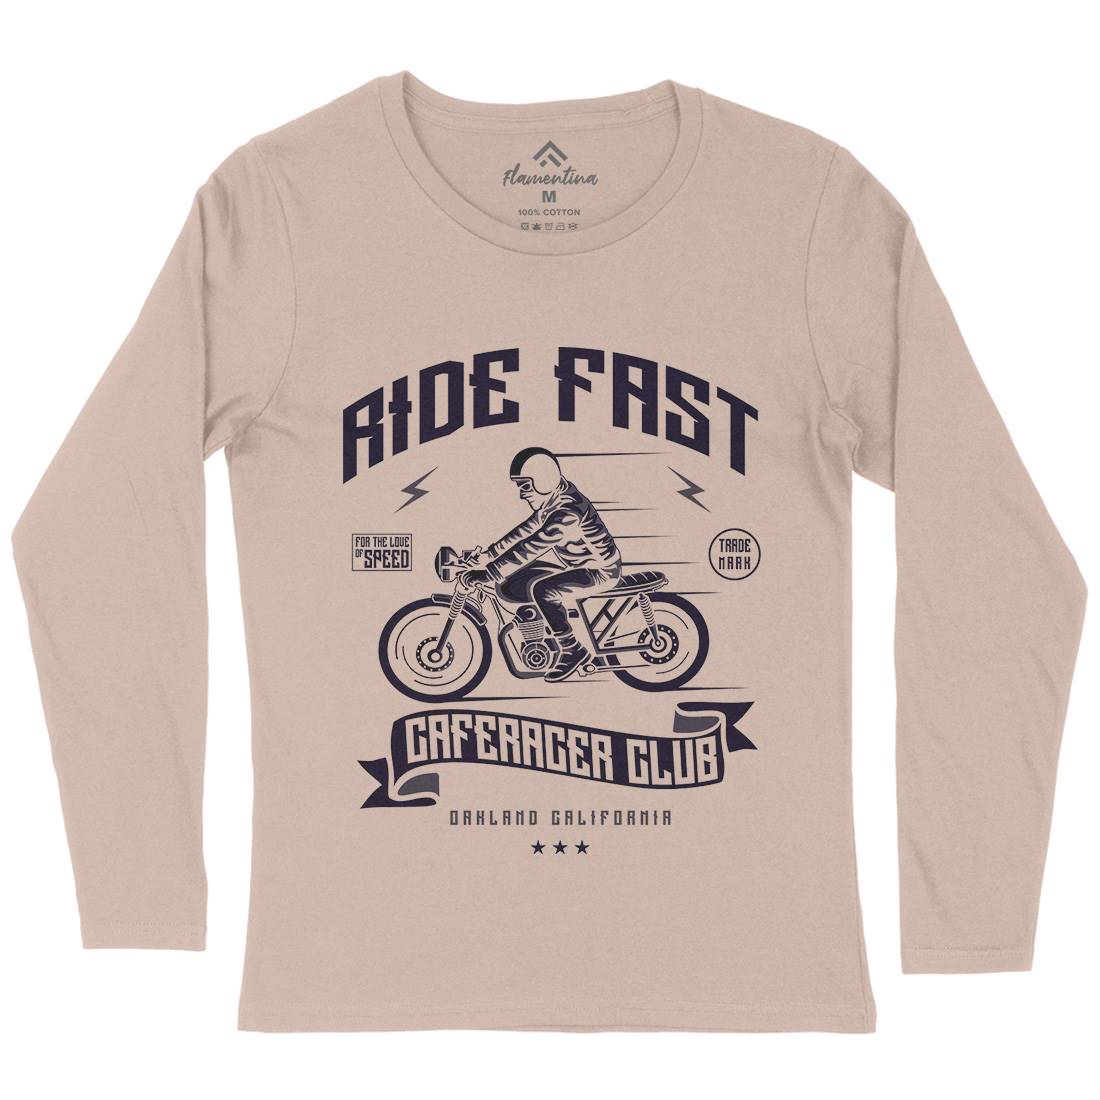 Ride Fast Womens Long Sleeve T-Shirt Motorcycles A117